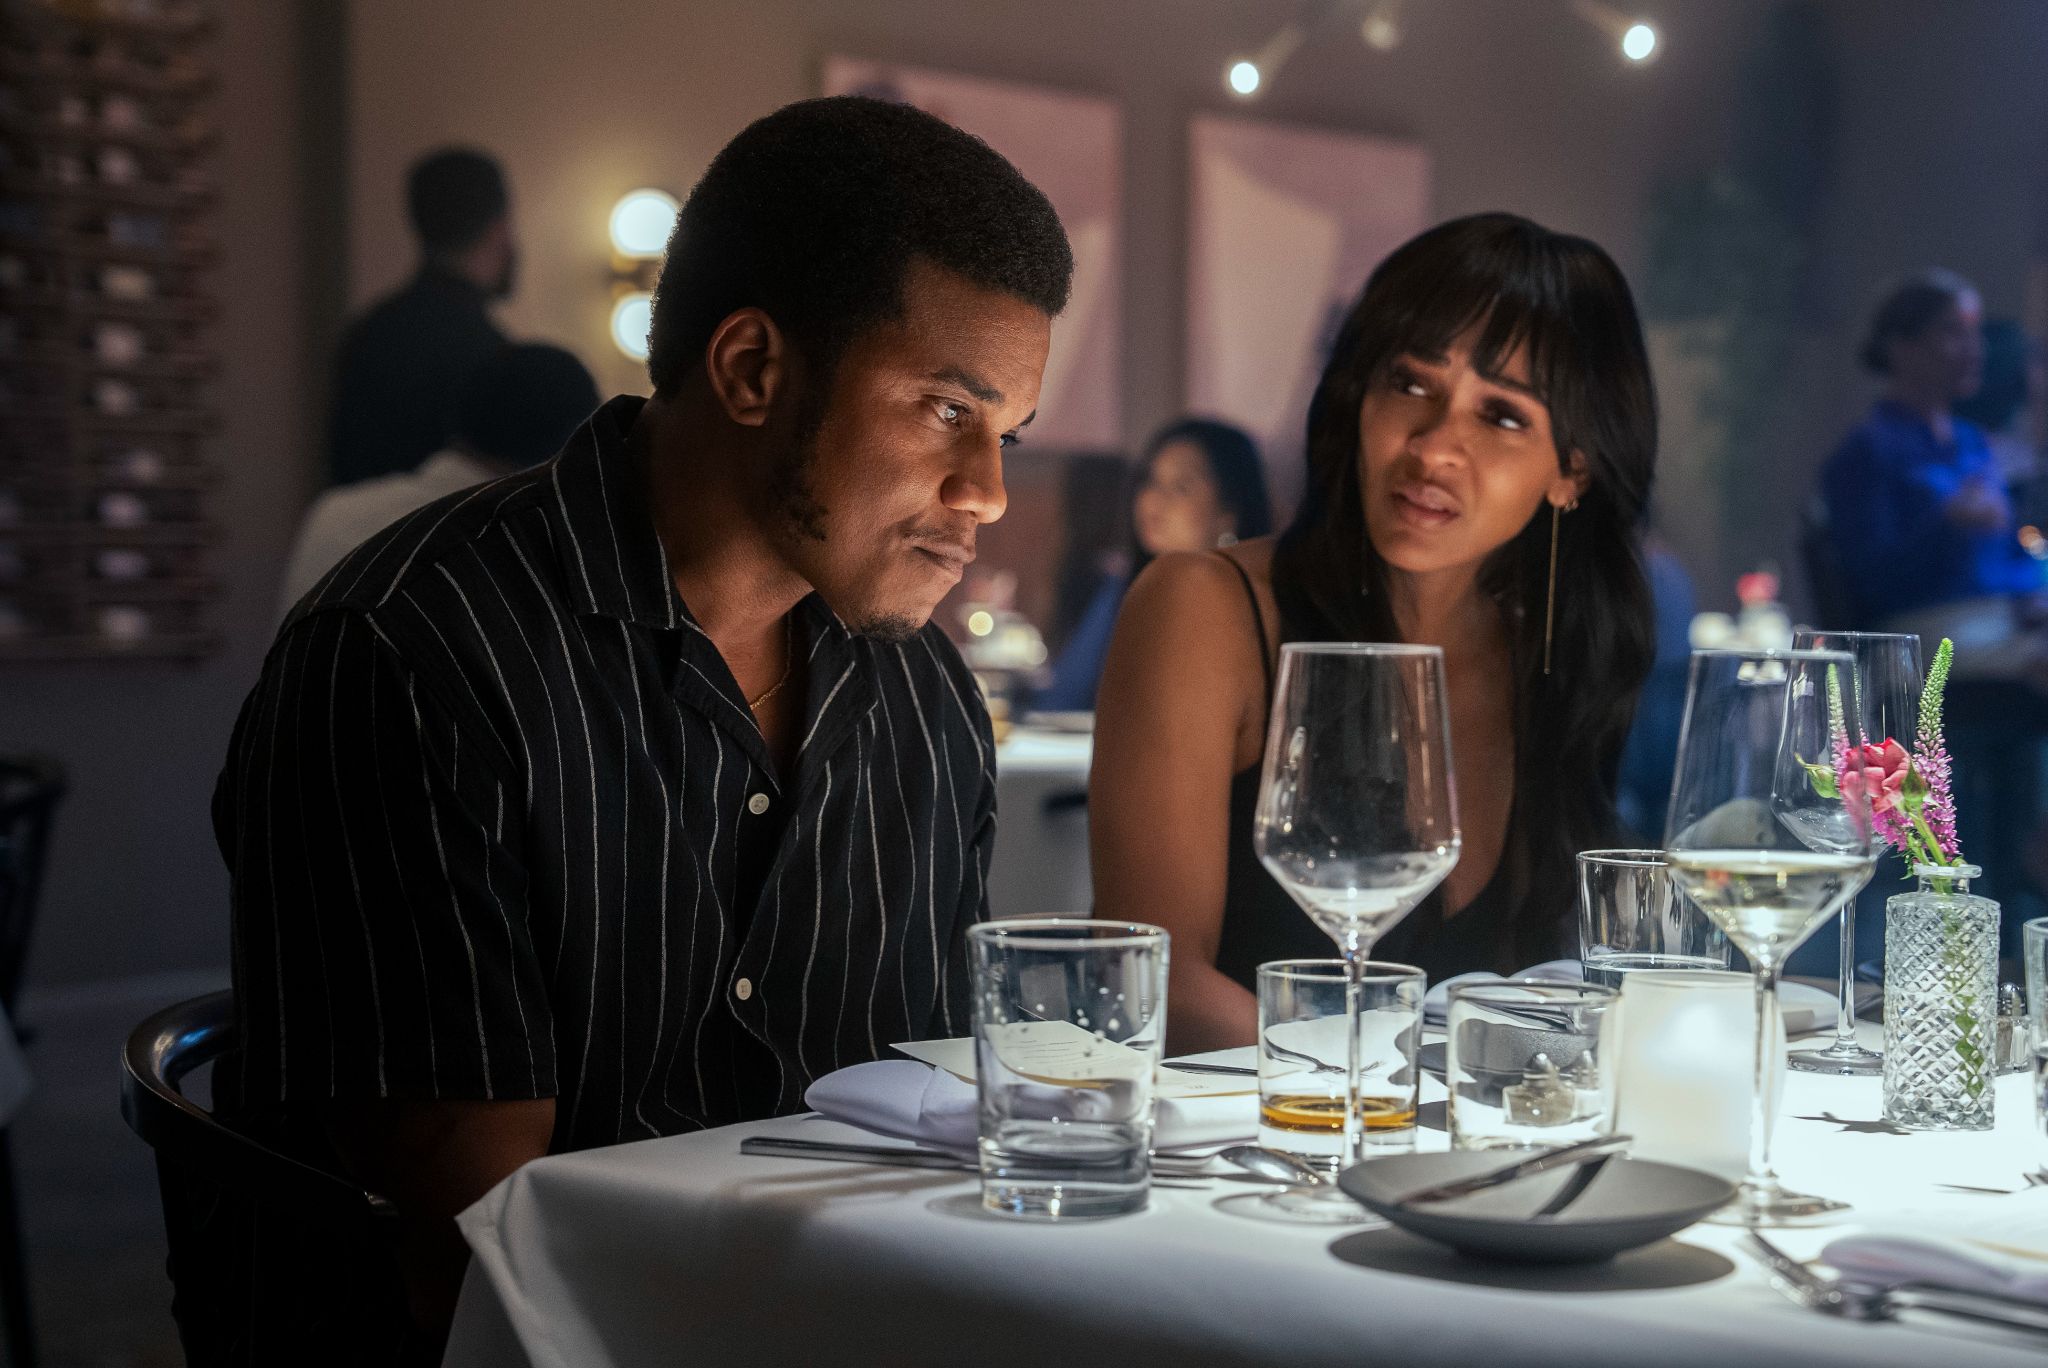 'Tyler Perry's Divorce In The Black' Trailer: Meagan Good And Cory Hardrict's Marriage Breaks Down In Prime Video Film